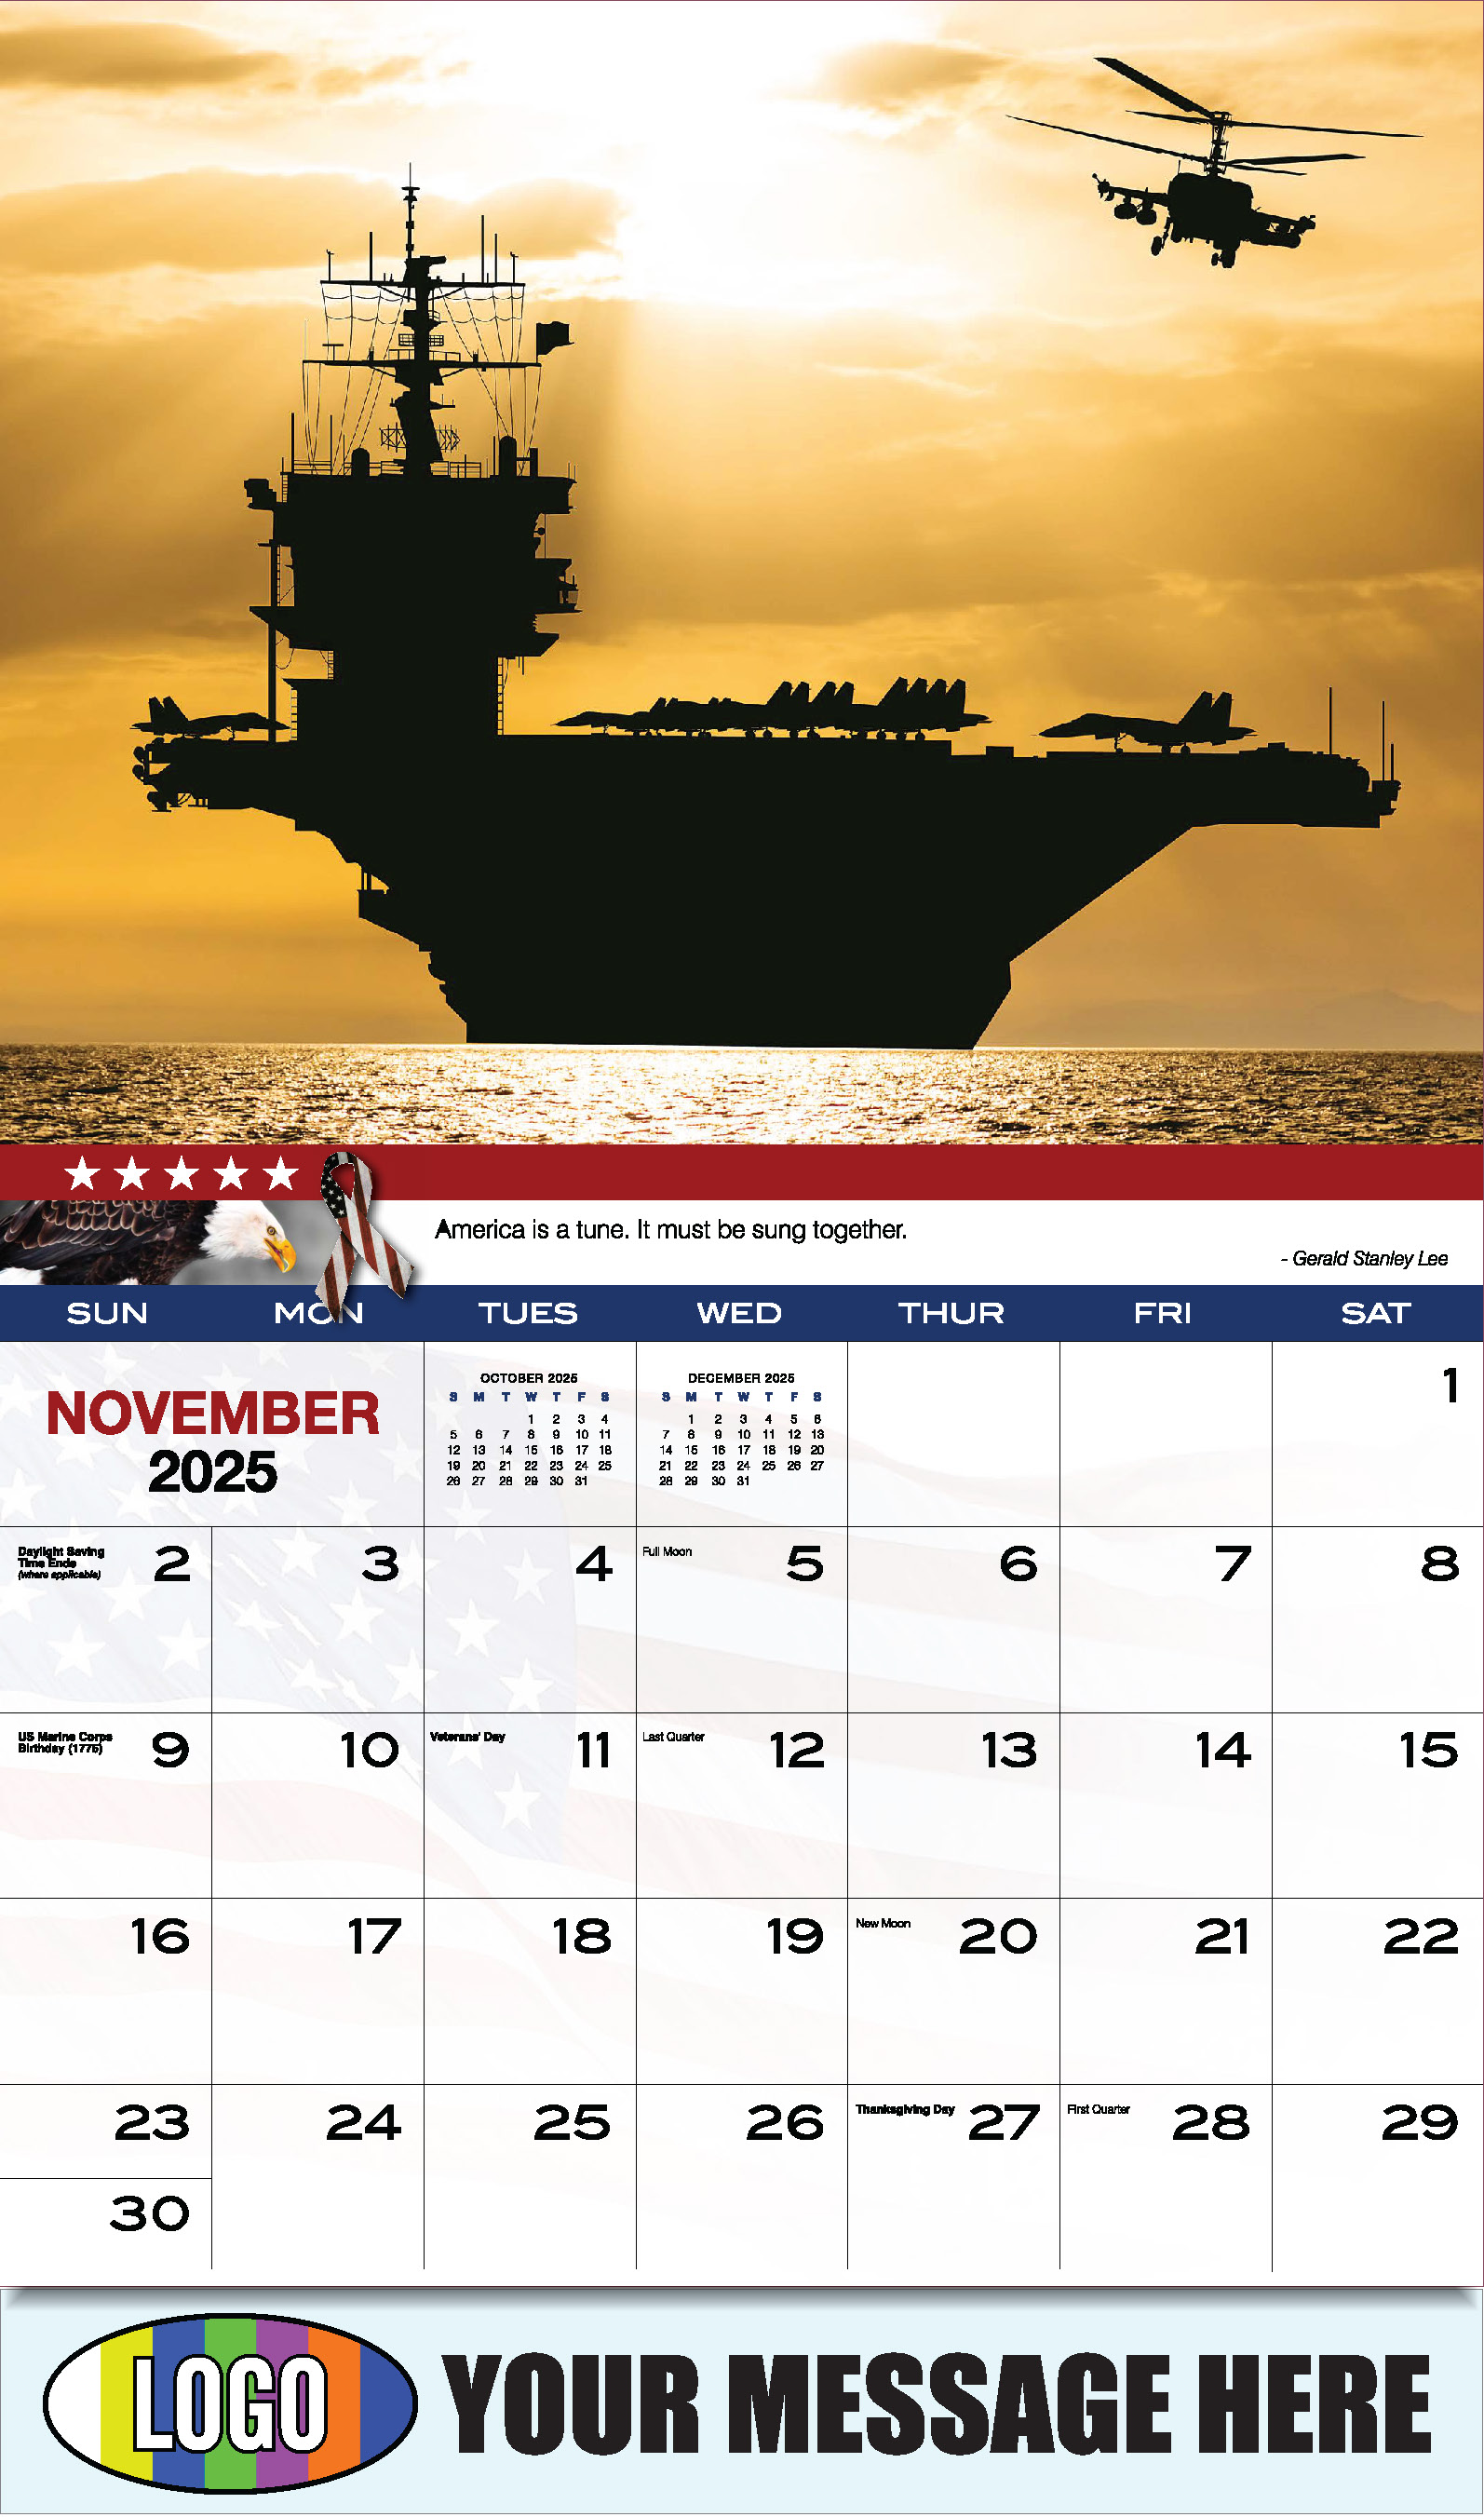 Home of the Brave 2025 USA Armed Forces Business Promo Calendar - November